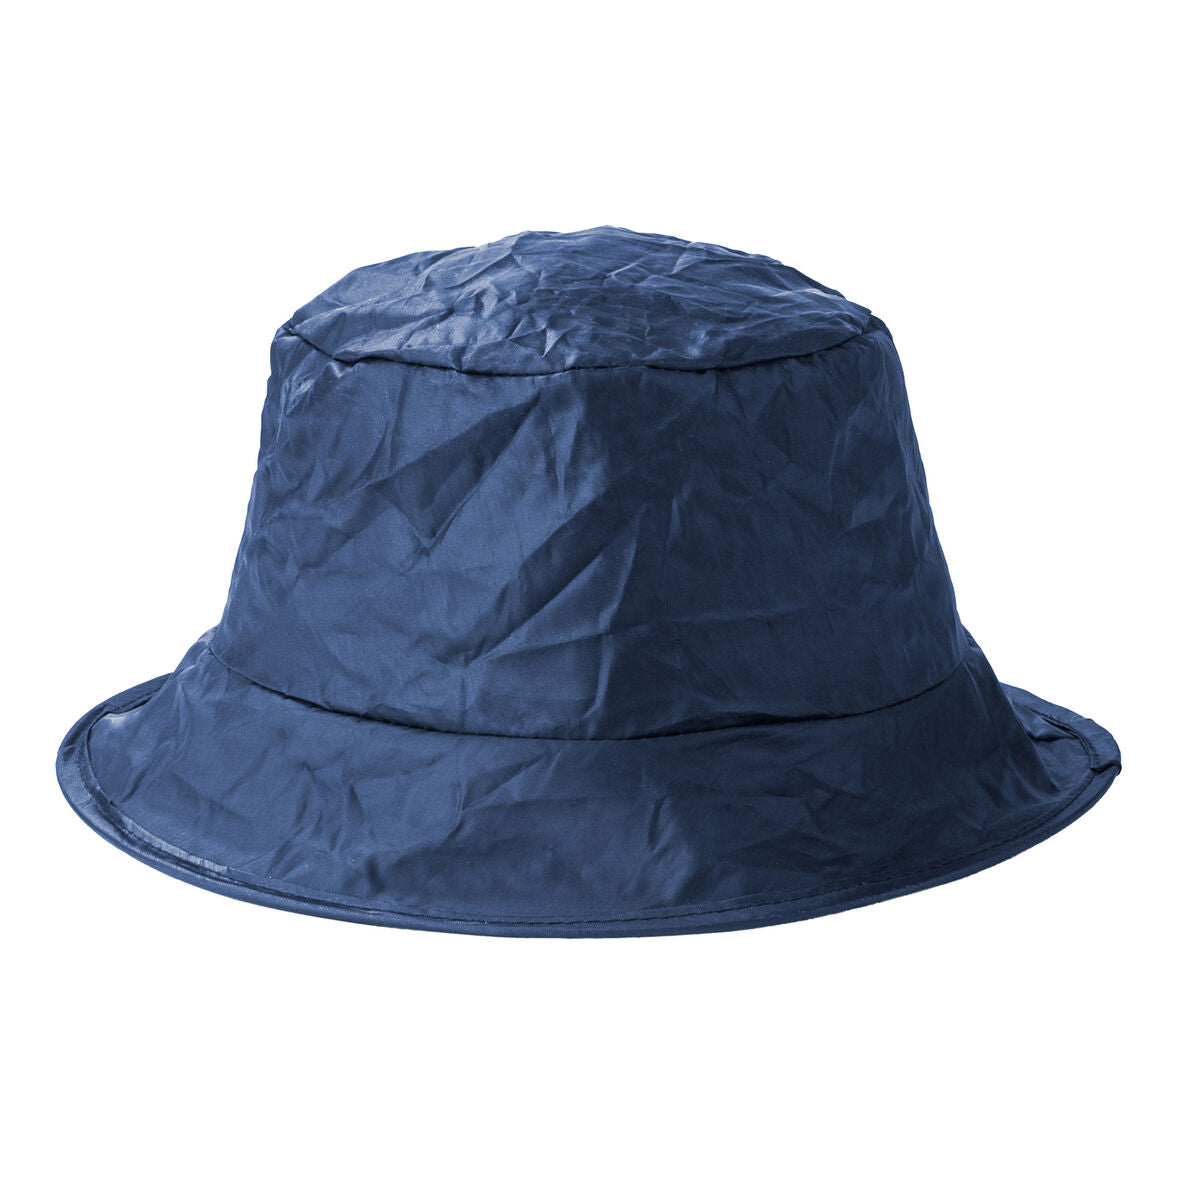 Gift | Legami SOS Sanpei Foldable Rain Hat - Blue by Weirs of Baggot St